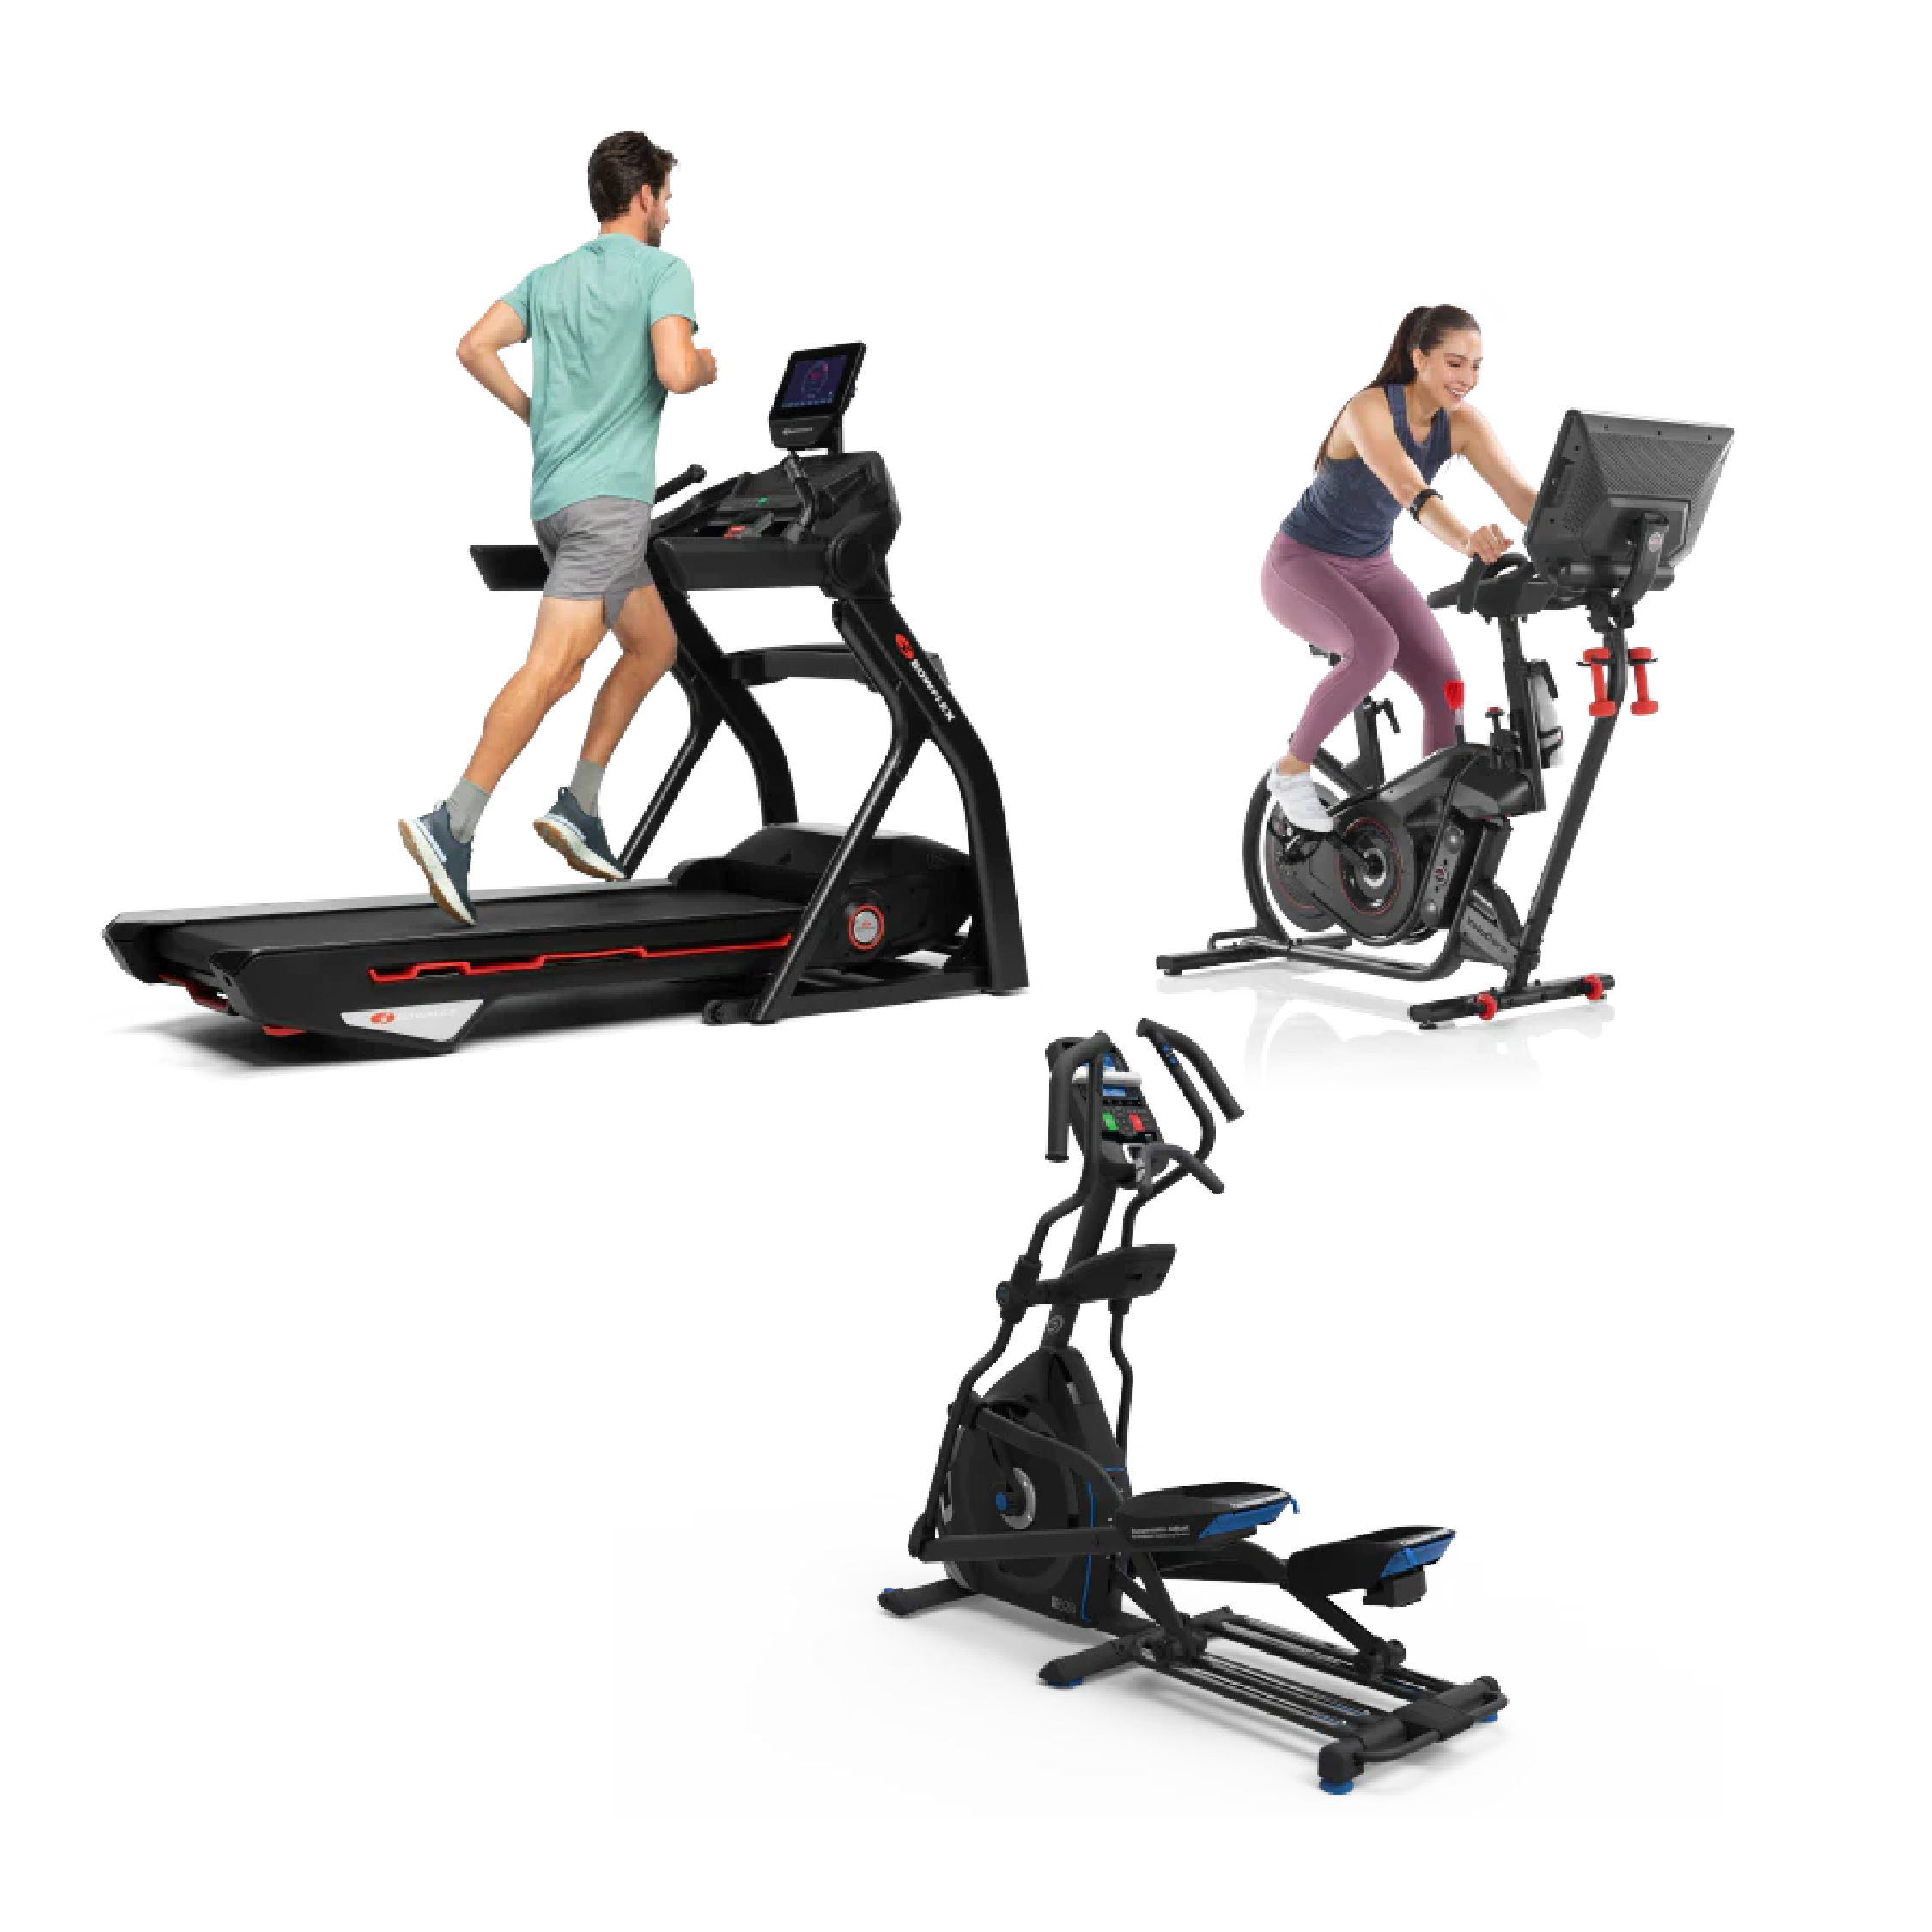 People on treadmills and bikes with images of the equipment.